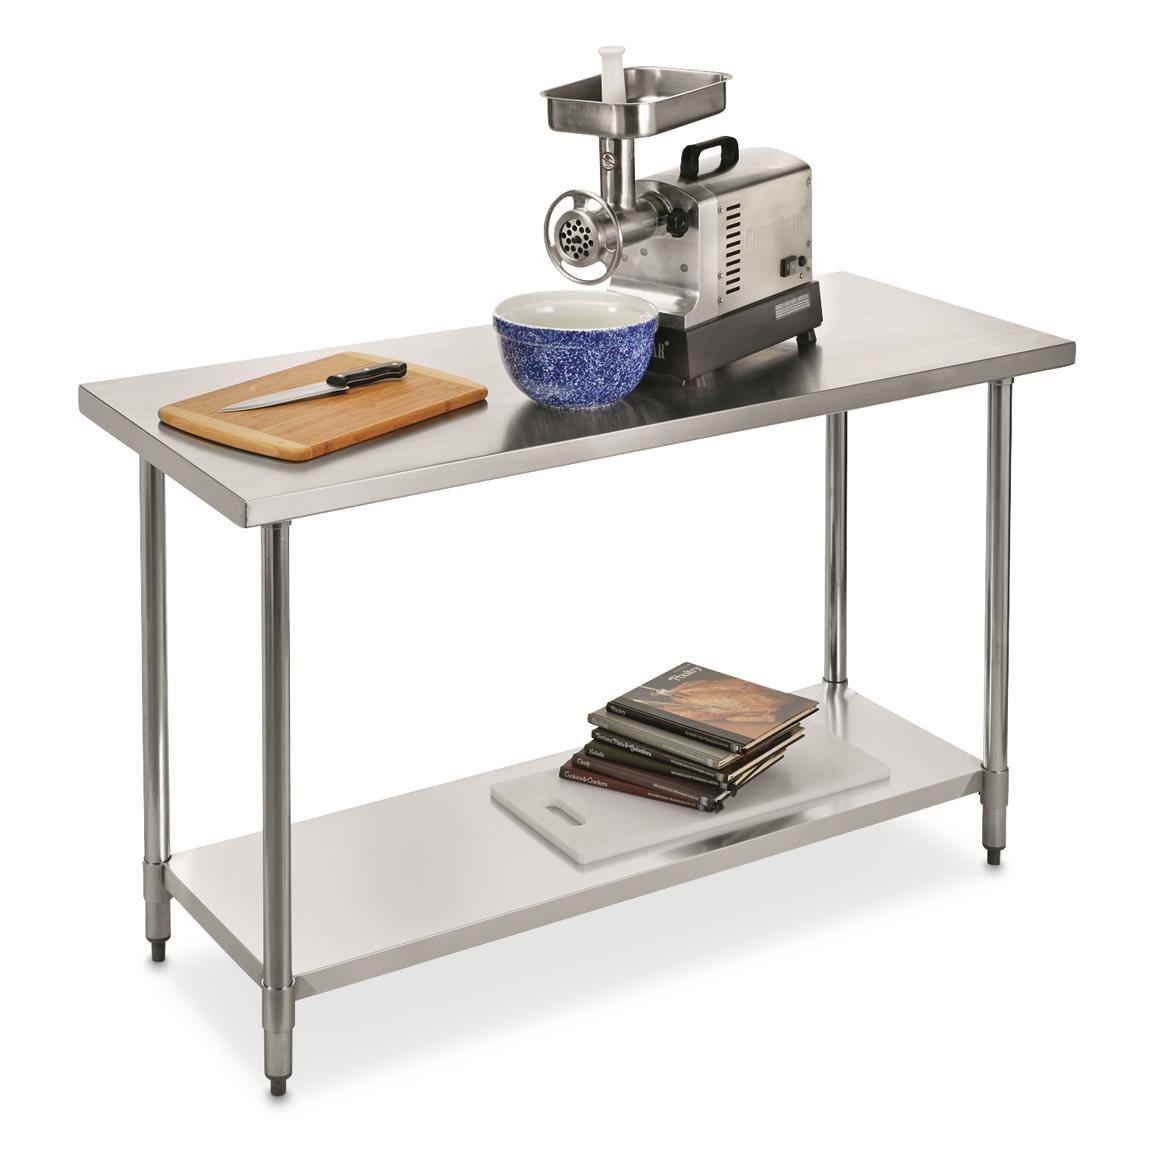 Guide Gear Stainless Steel Work Table, 60" x 24"